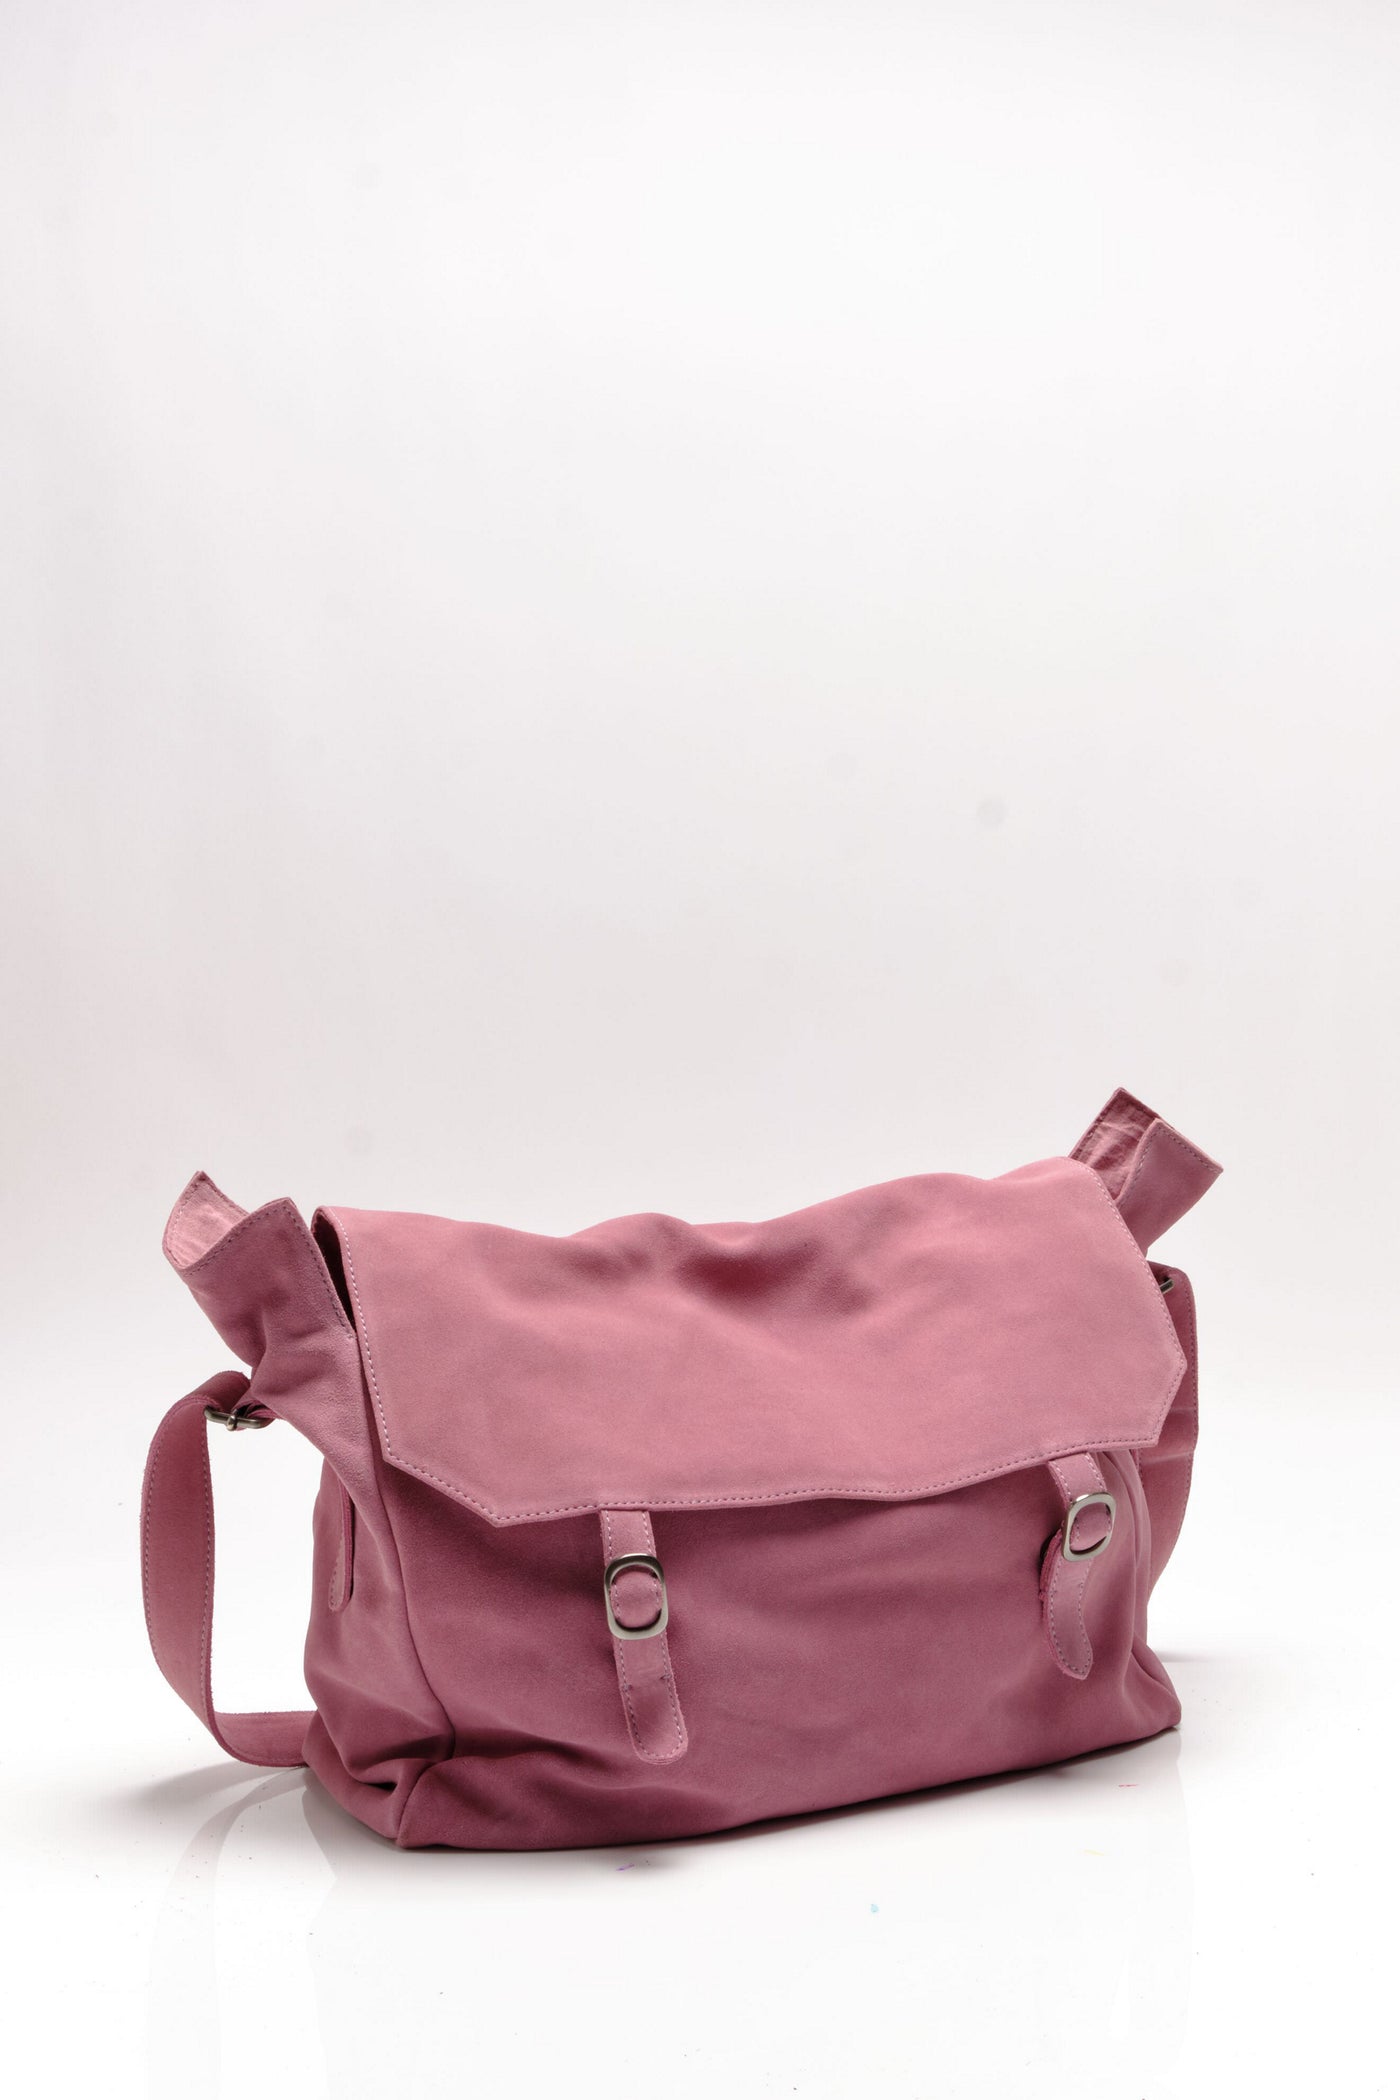 Zahara Suede Messenger - Orchid